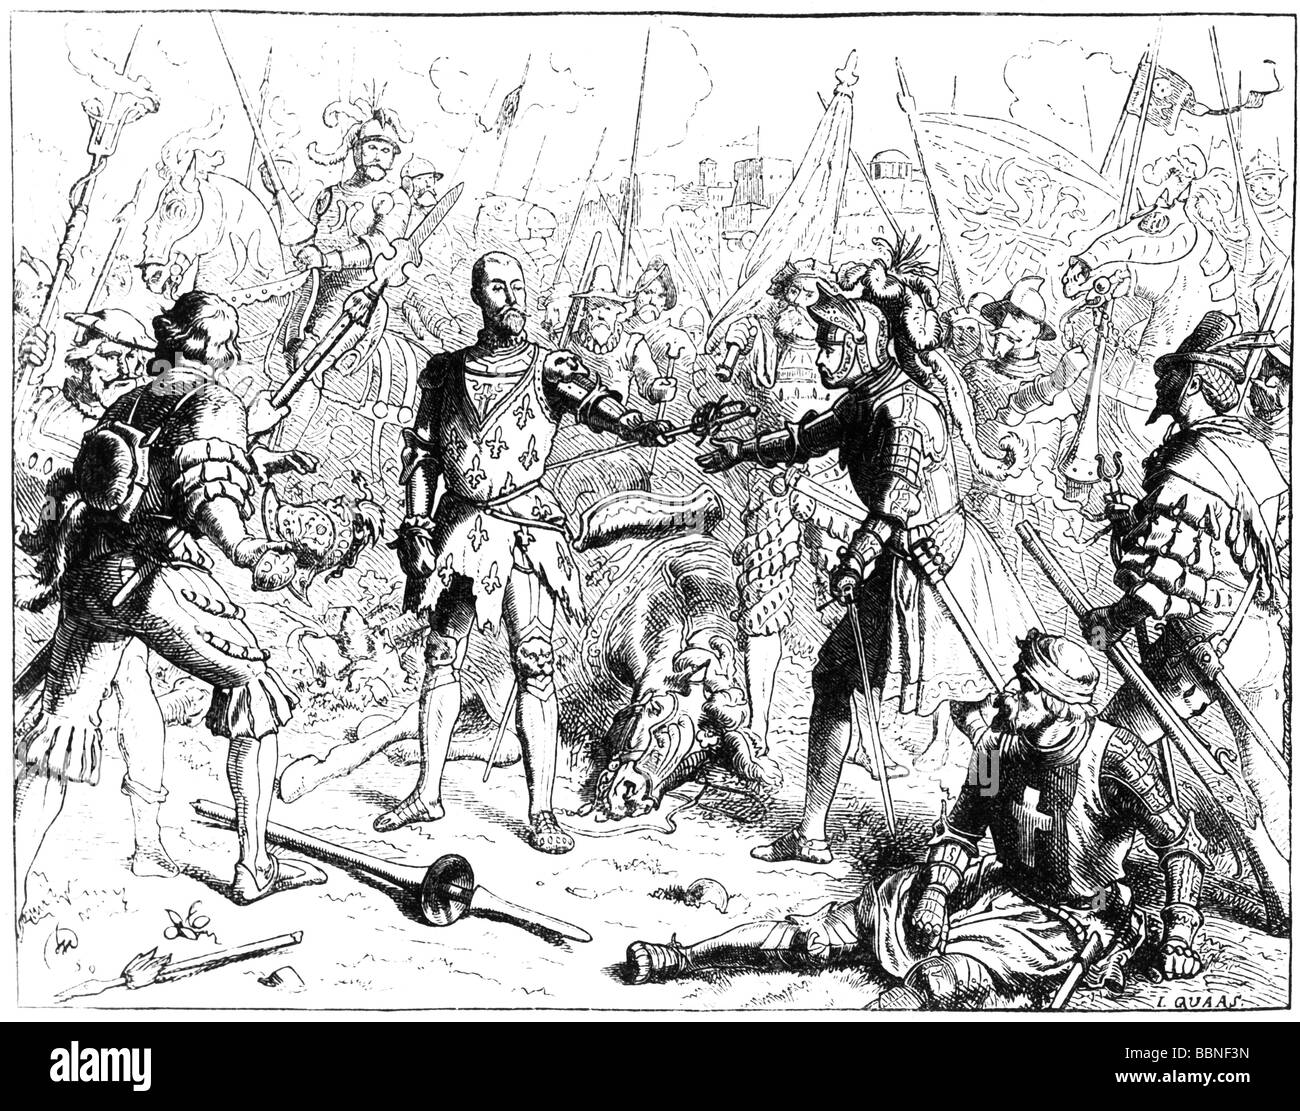 Francis I, 12.9.1494 - 31.3.1547, King of France 1.1.1515 - 31.3.1547, captured on the Battle of Pavia, 24.2.1525, wood engraving after drawing by Wilhelm Camphausen, 1859, , Stock Photo